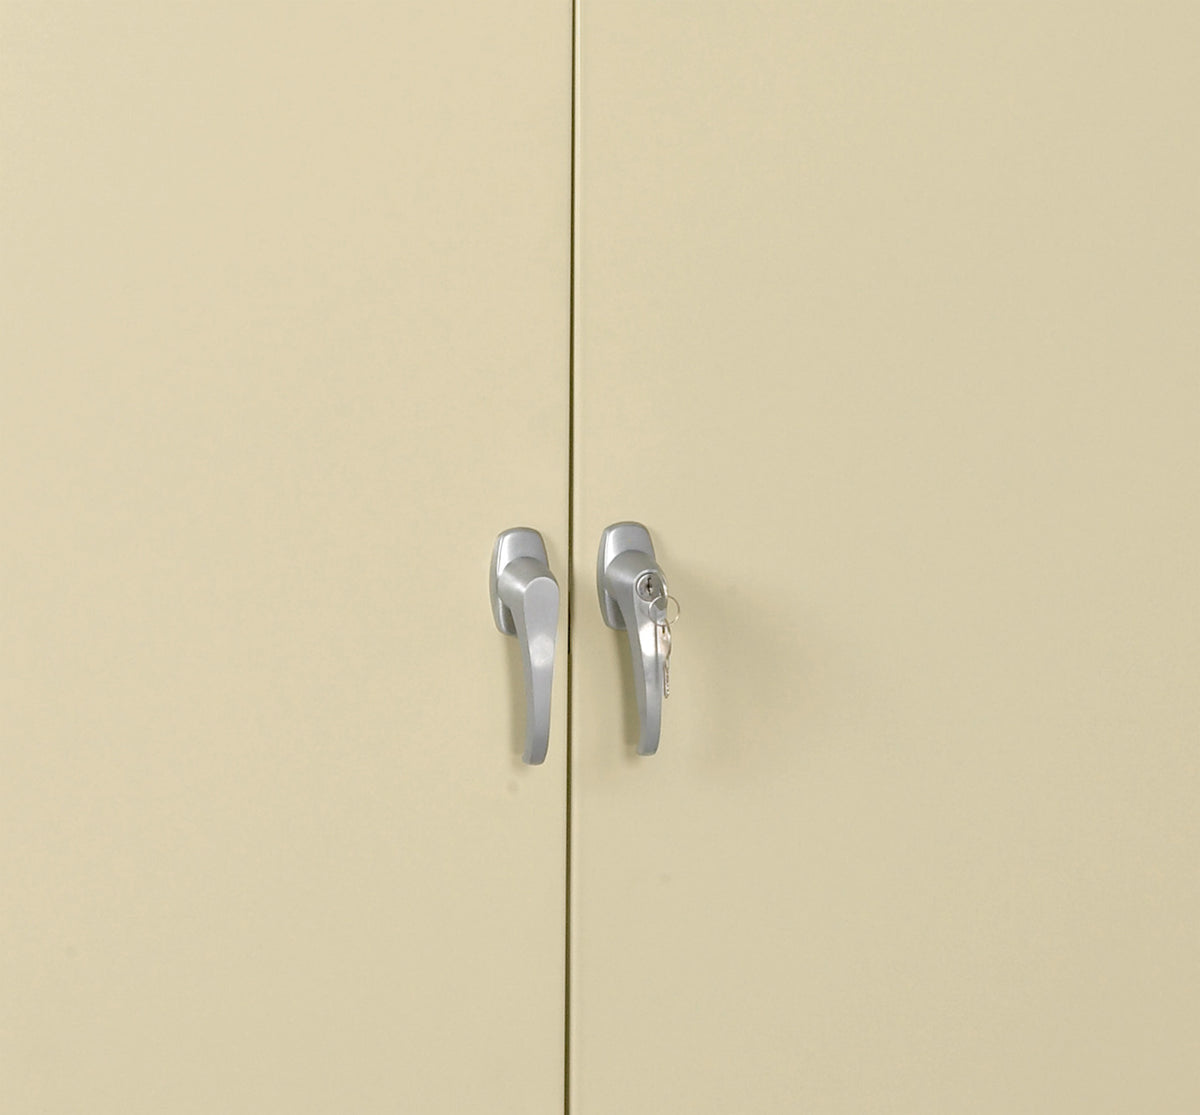 Tennsco Keyed Alike Lock for Storage Cabinets (Factory Installed)